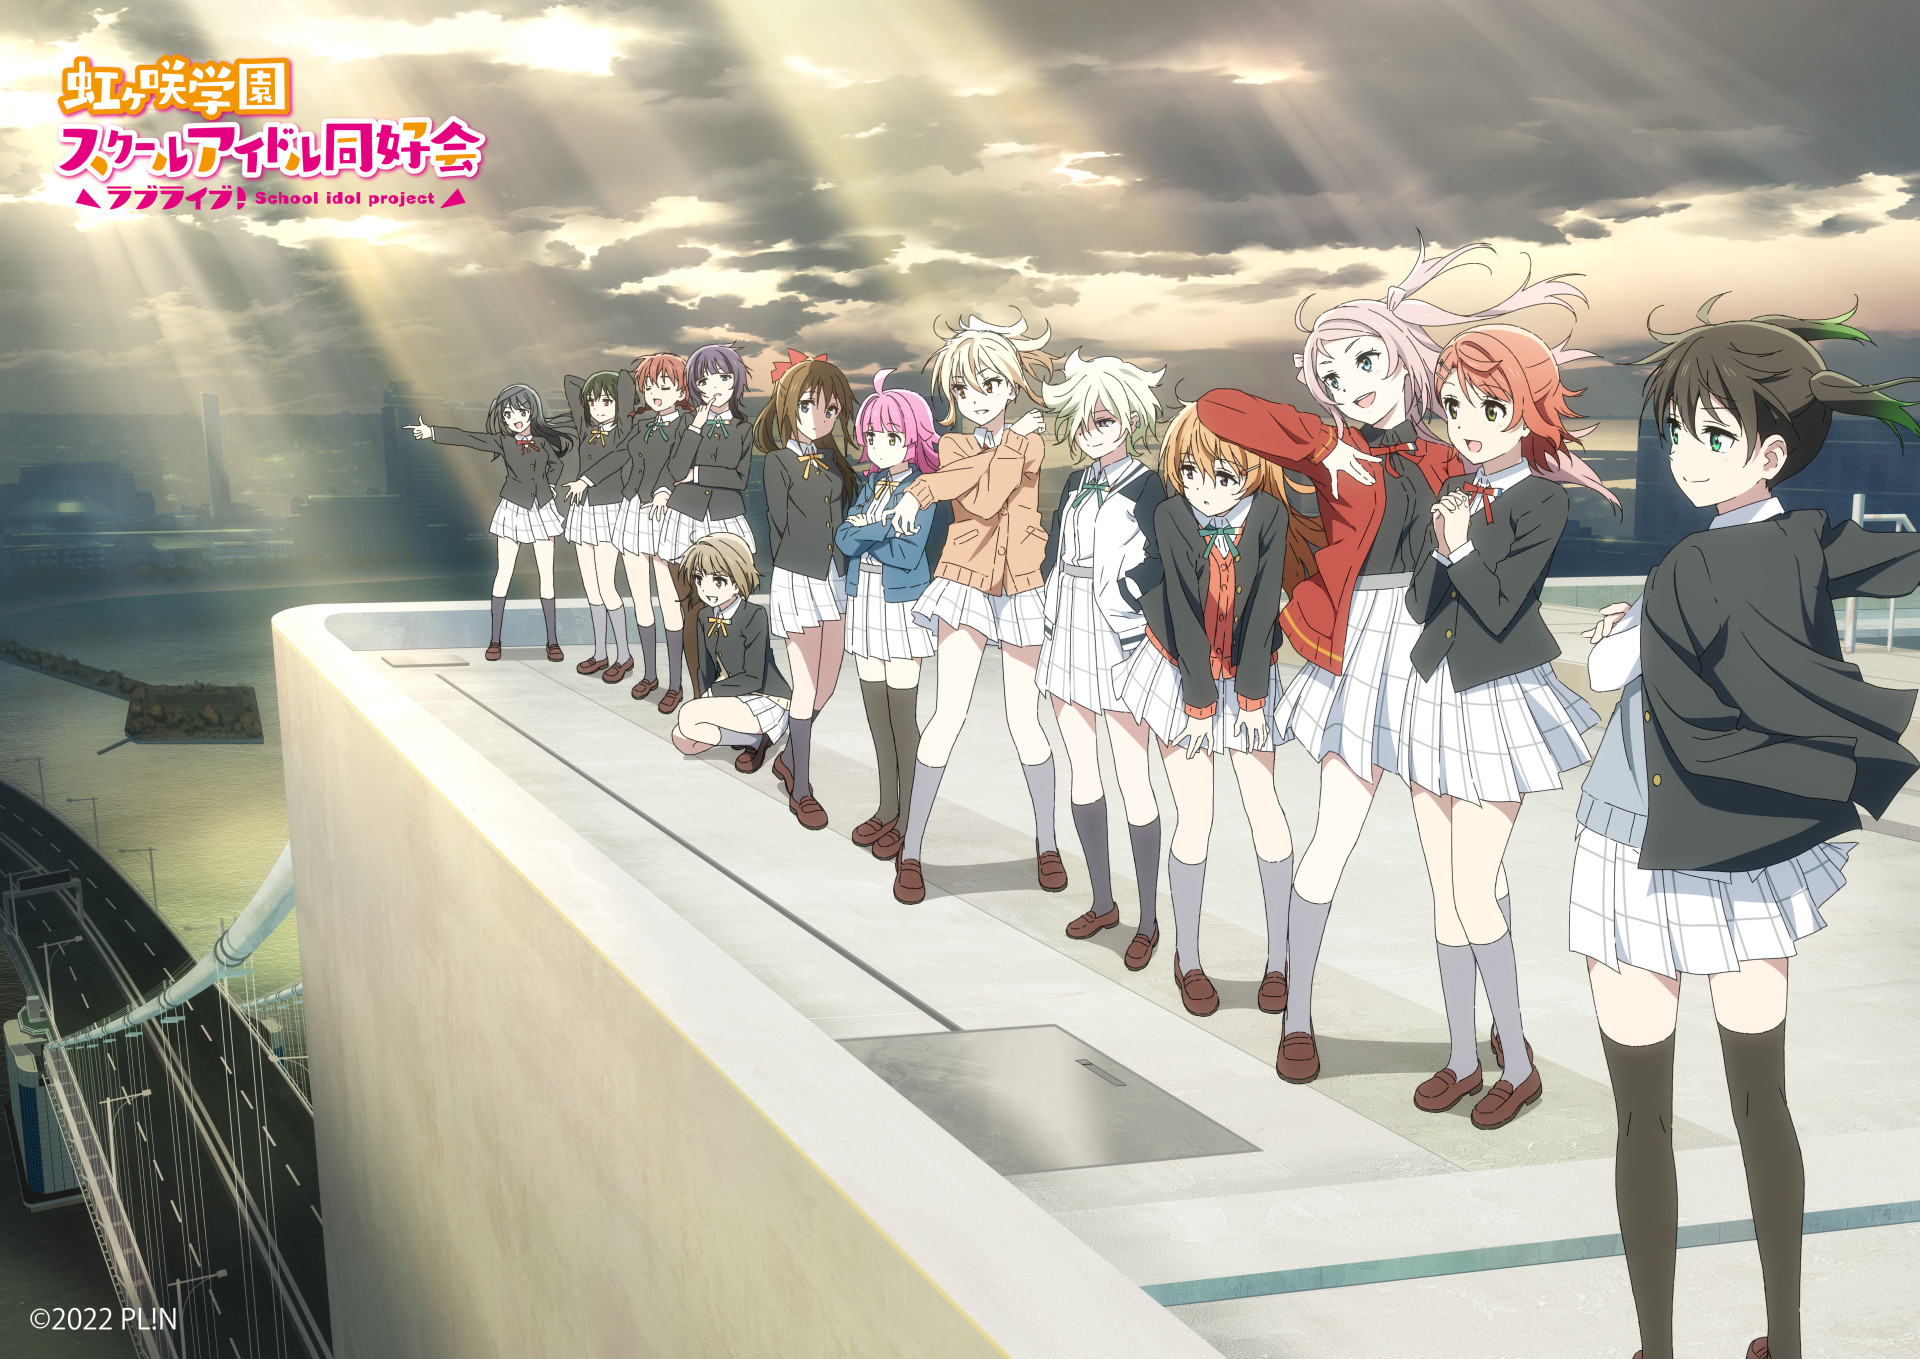 Mahou Shoujo Magical Destroyers • Magical Girl Magical Destroyers - Episode  7 discussion : r/anime